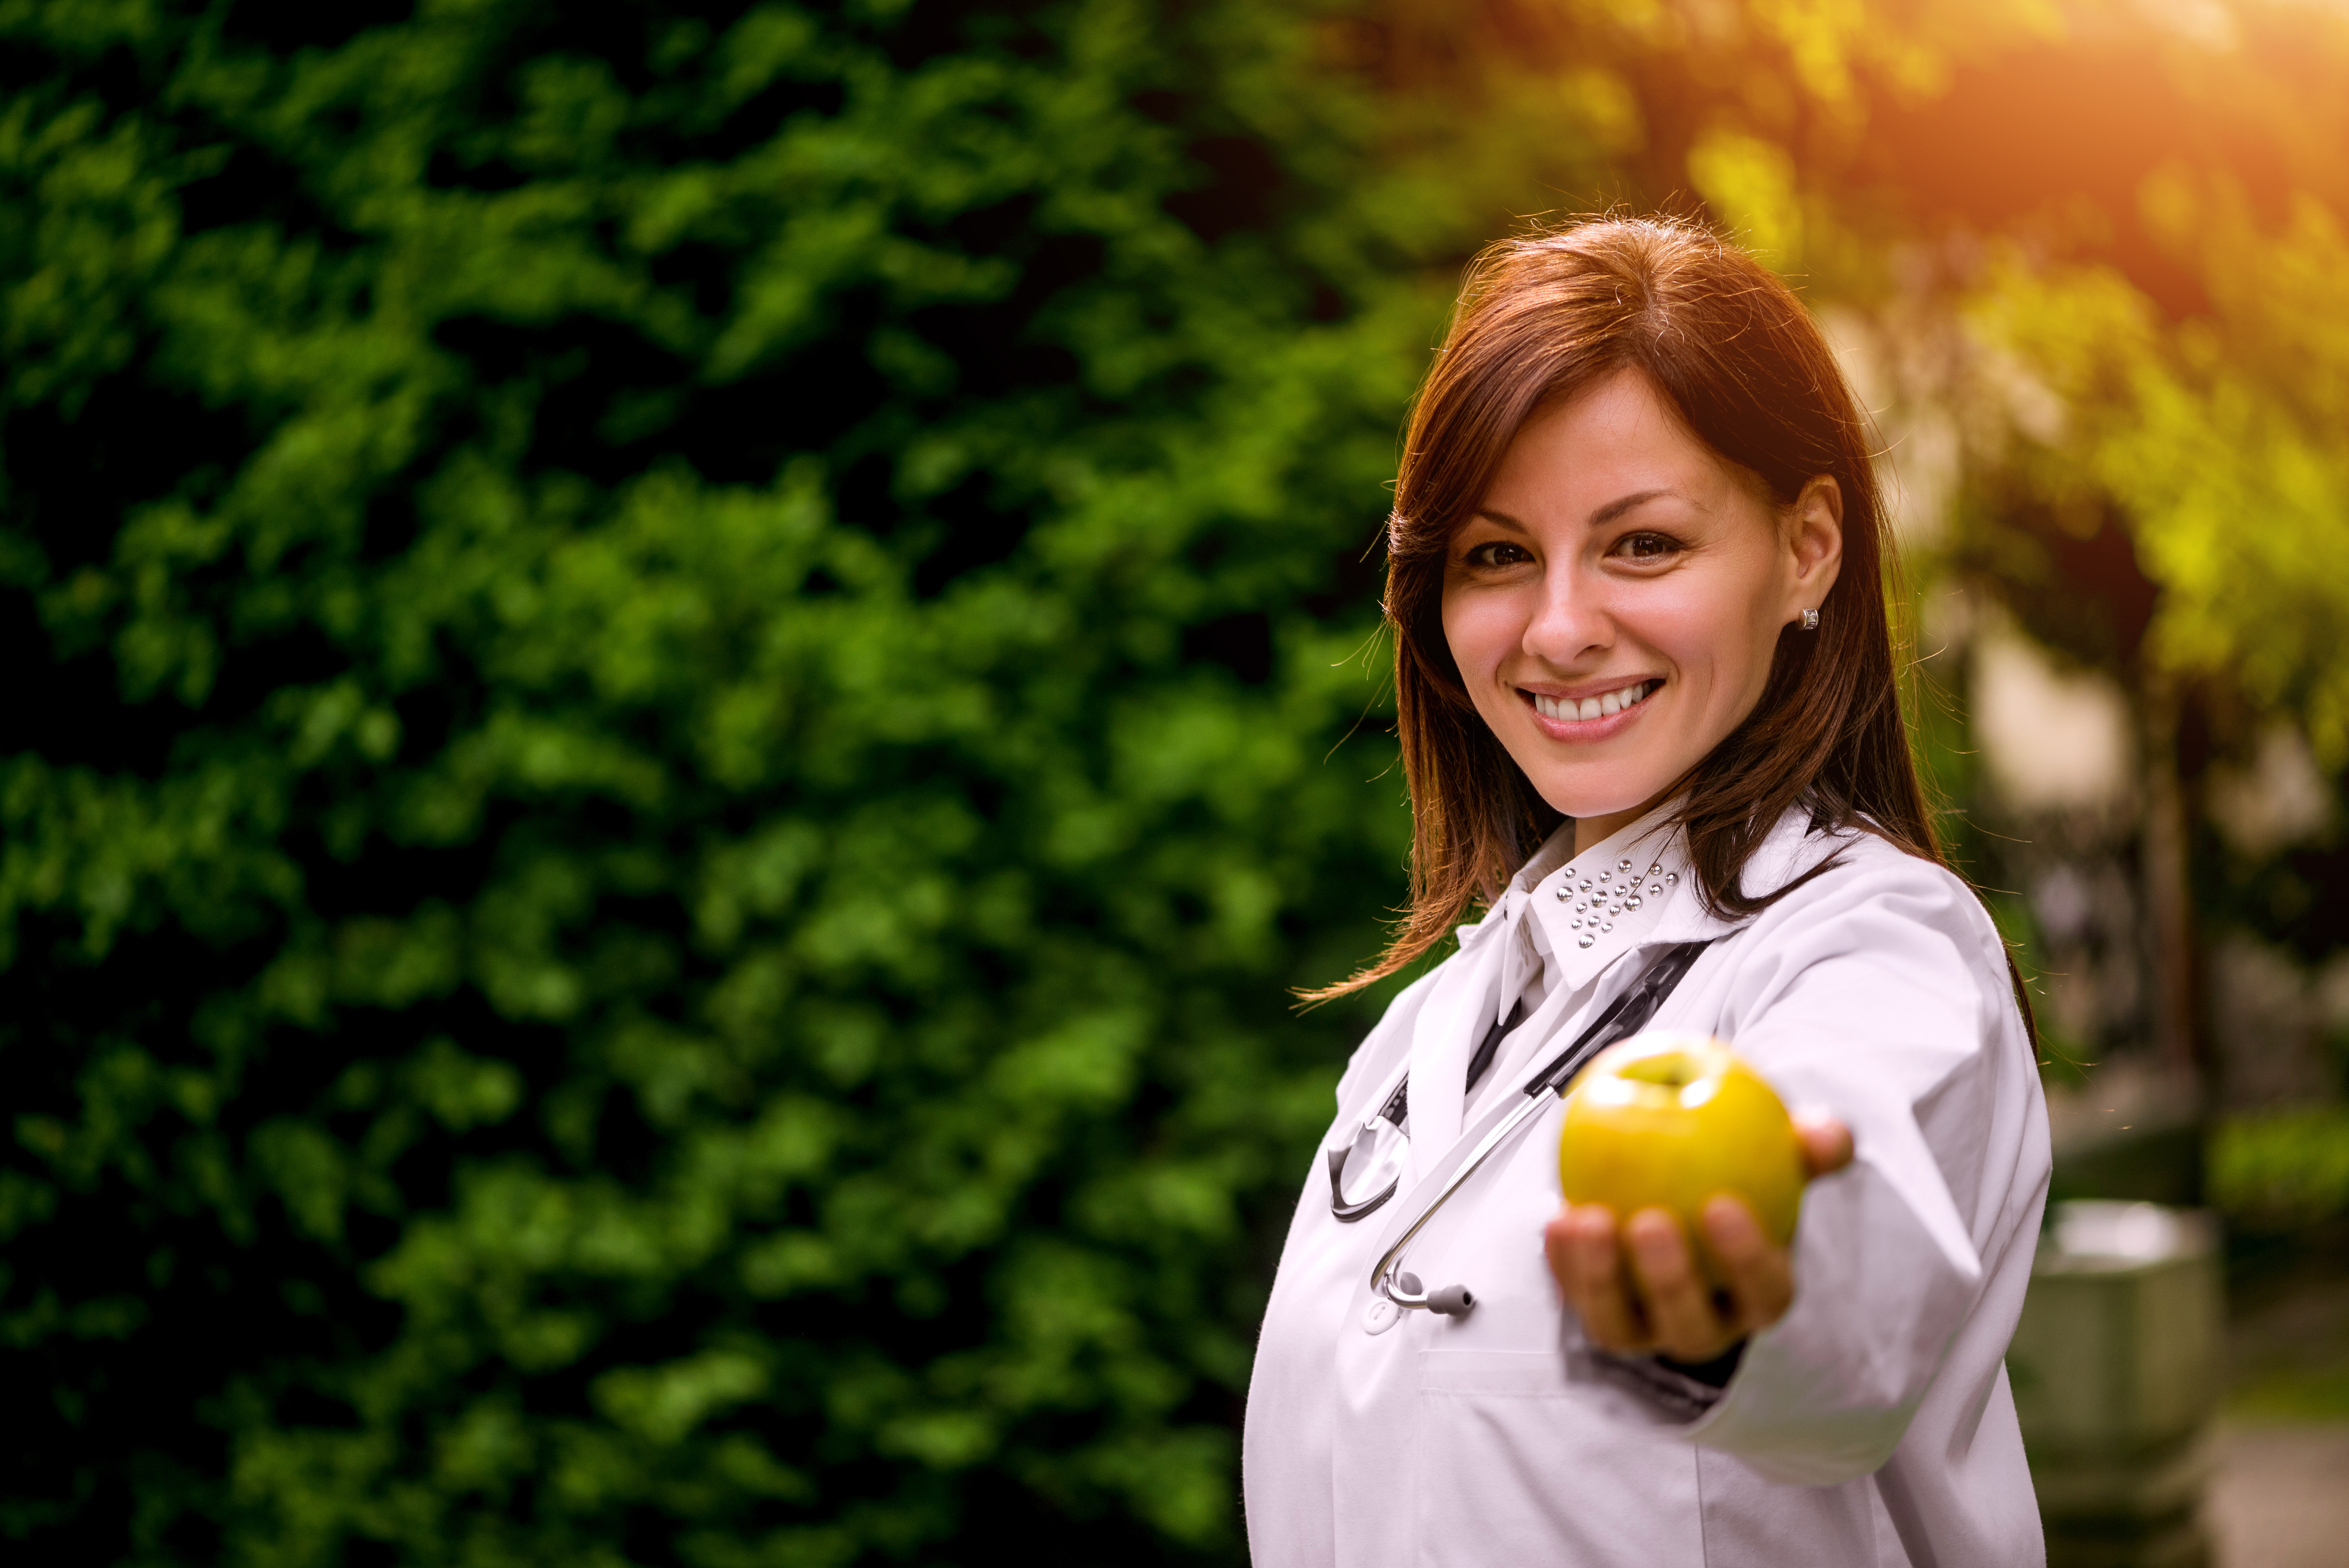 Energy Boosting Produce for the Hardworking Doctor